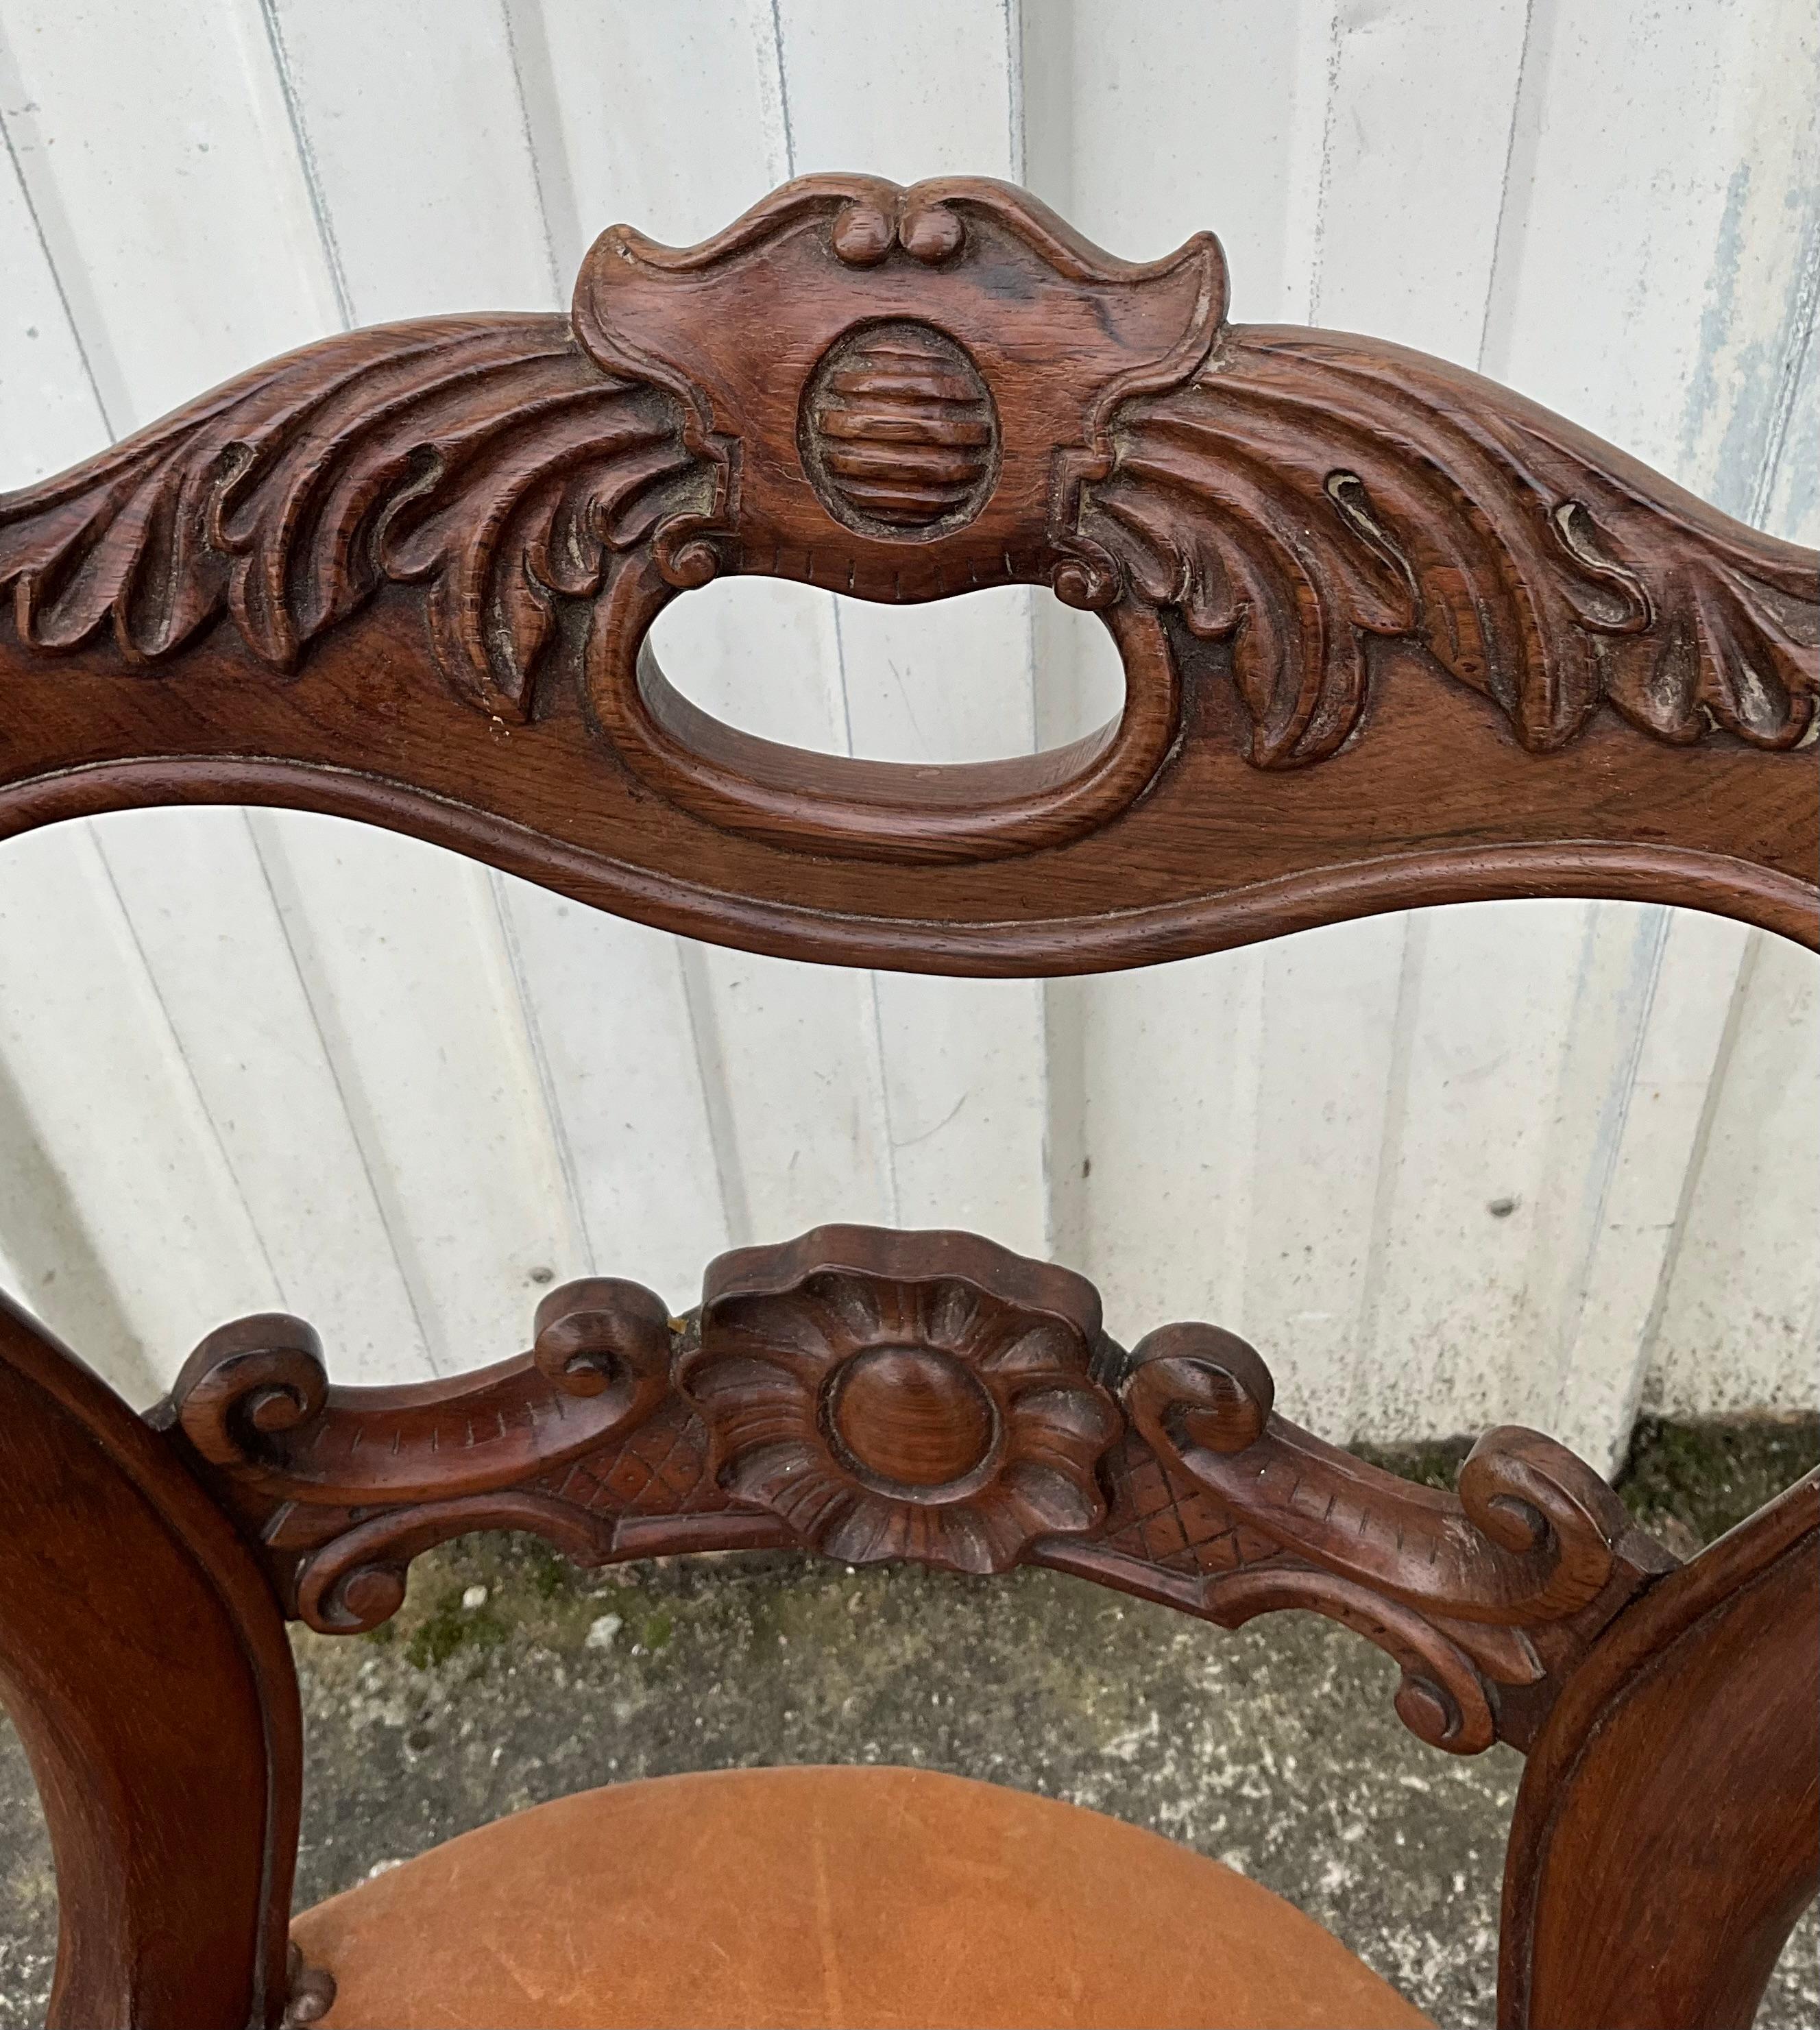 This harpist chair is made of solid rosewood. The seat is of very good quality and is covered with tan leather.

The height of the seat is adjusted using a metal screw in the leg of the chair.

The seat height at the lowest is 47 cm and at the